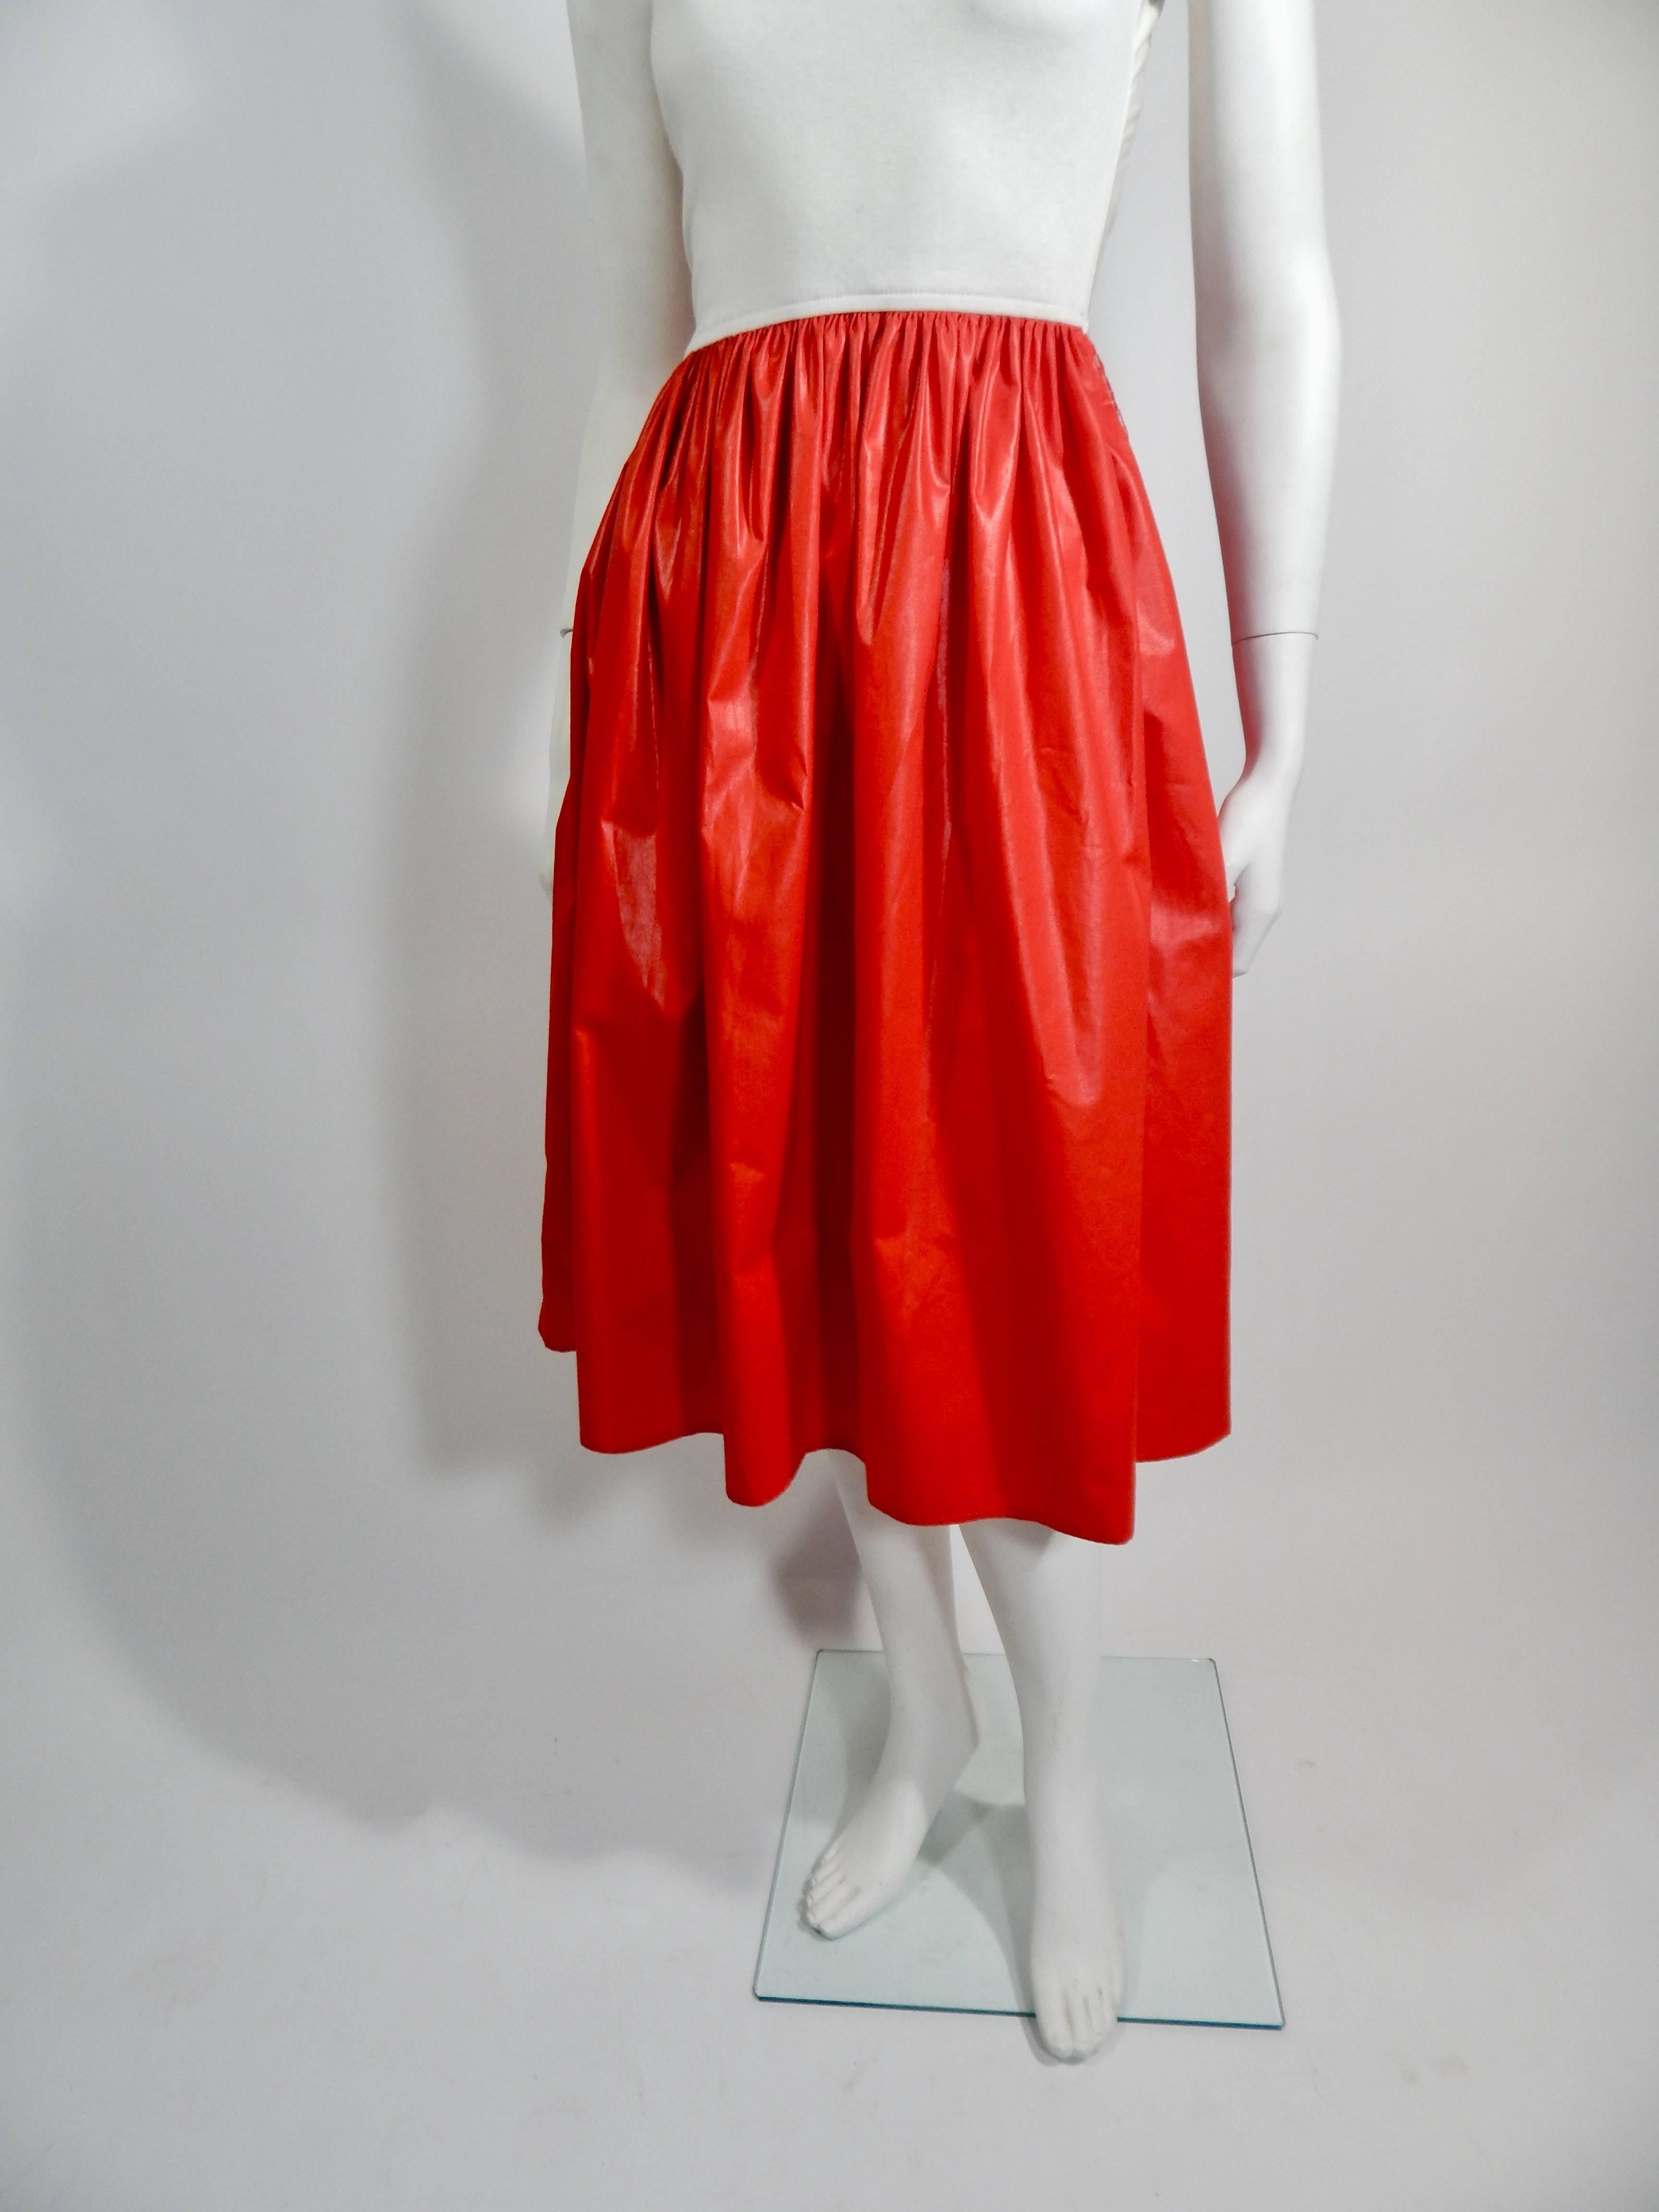 Late 1970s / early 1980s Dress. Off White Cotton asymmetrical top pleated at shoulder. Bottom is a bright Red Chintz Fabric Pleated at waist. Zip up side. Vintage Tag reads size 8, however it is a modern day size 2 / 4. 
Excellent Condition. 